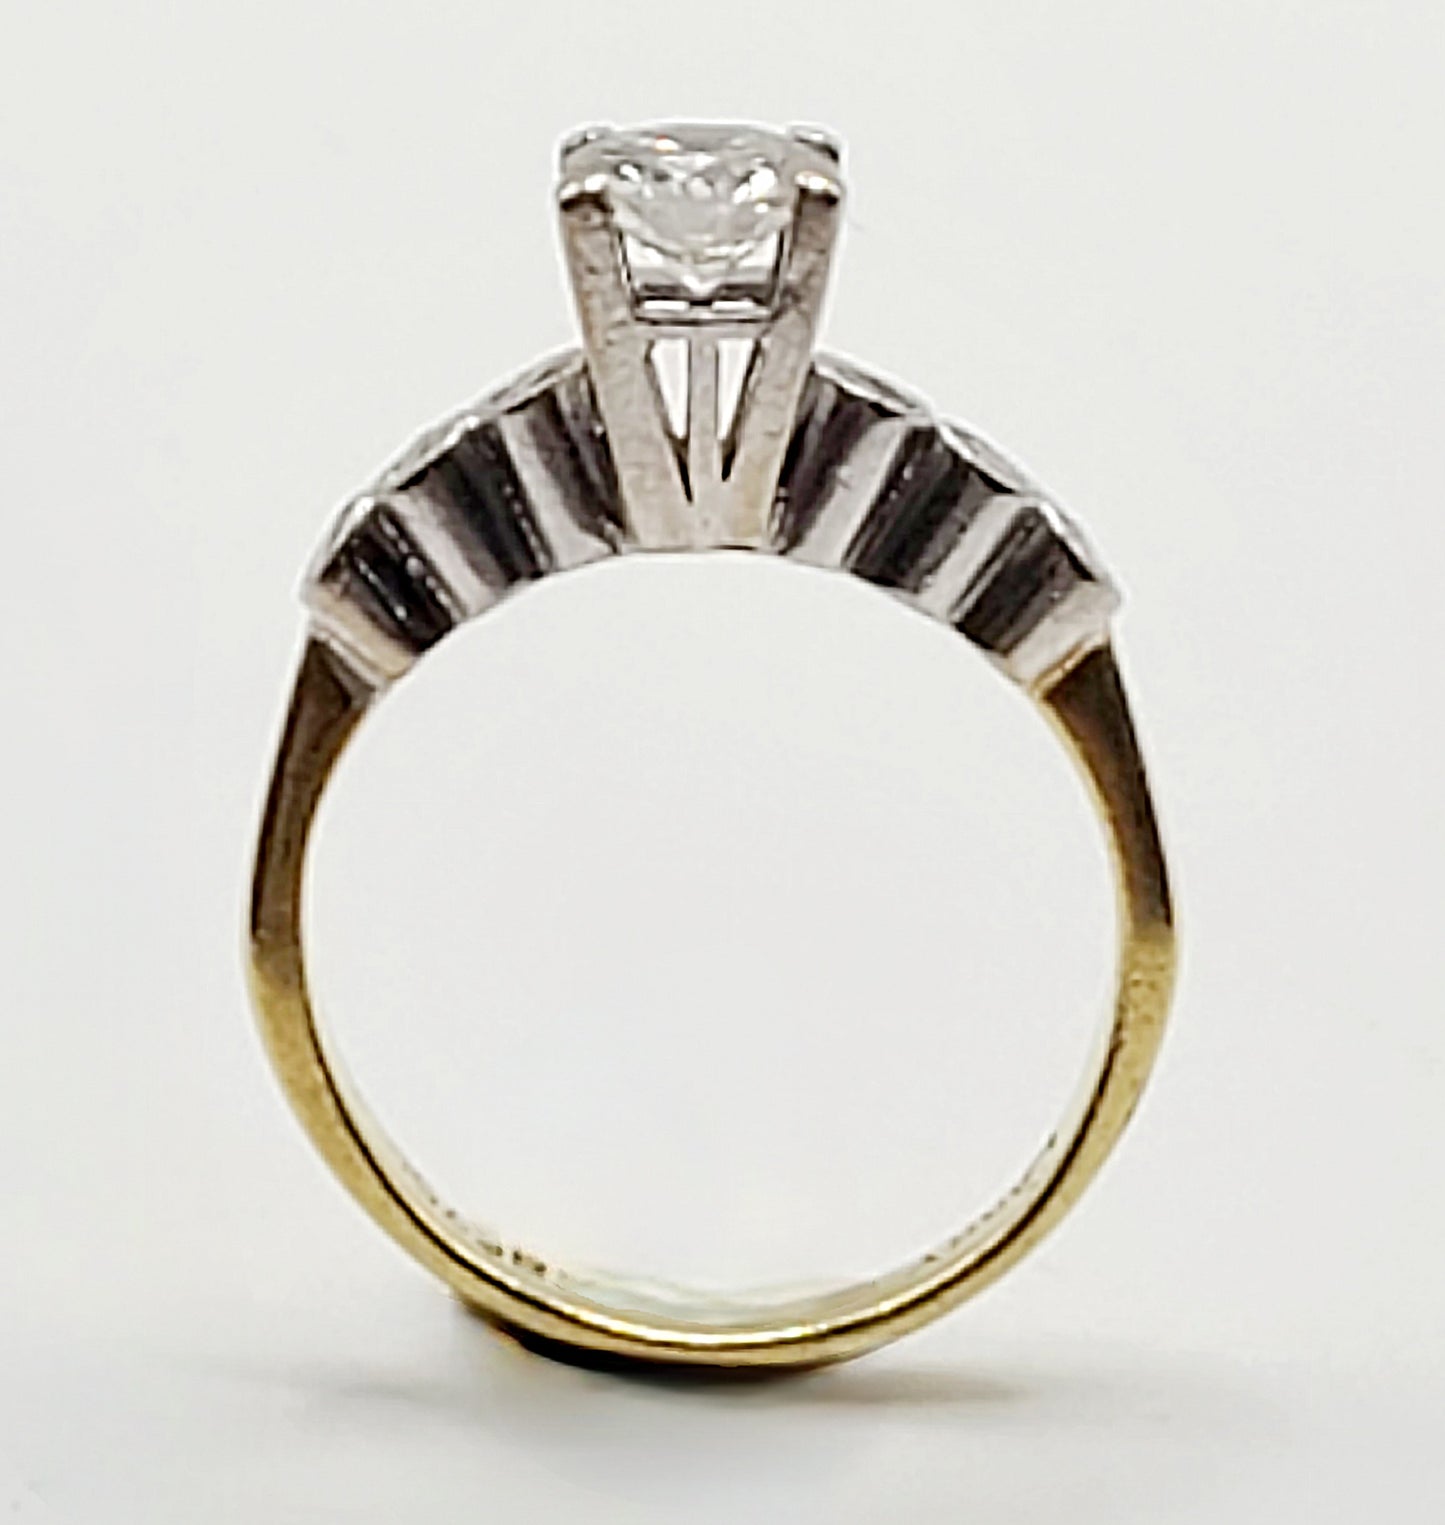 Art deco Ring set with 7 Diamonds on 18ct Gold - Size J1/2